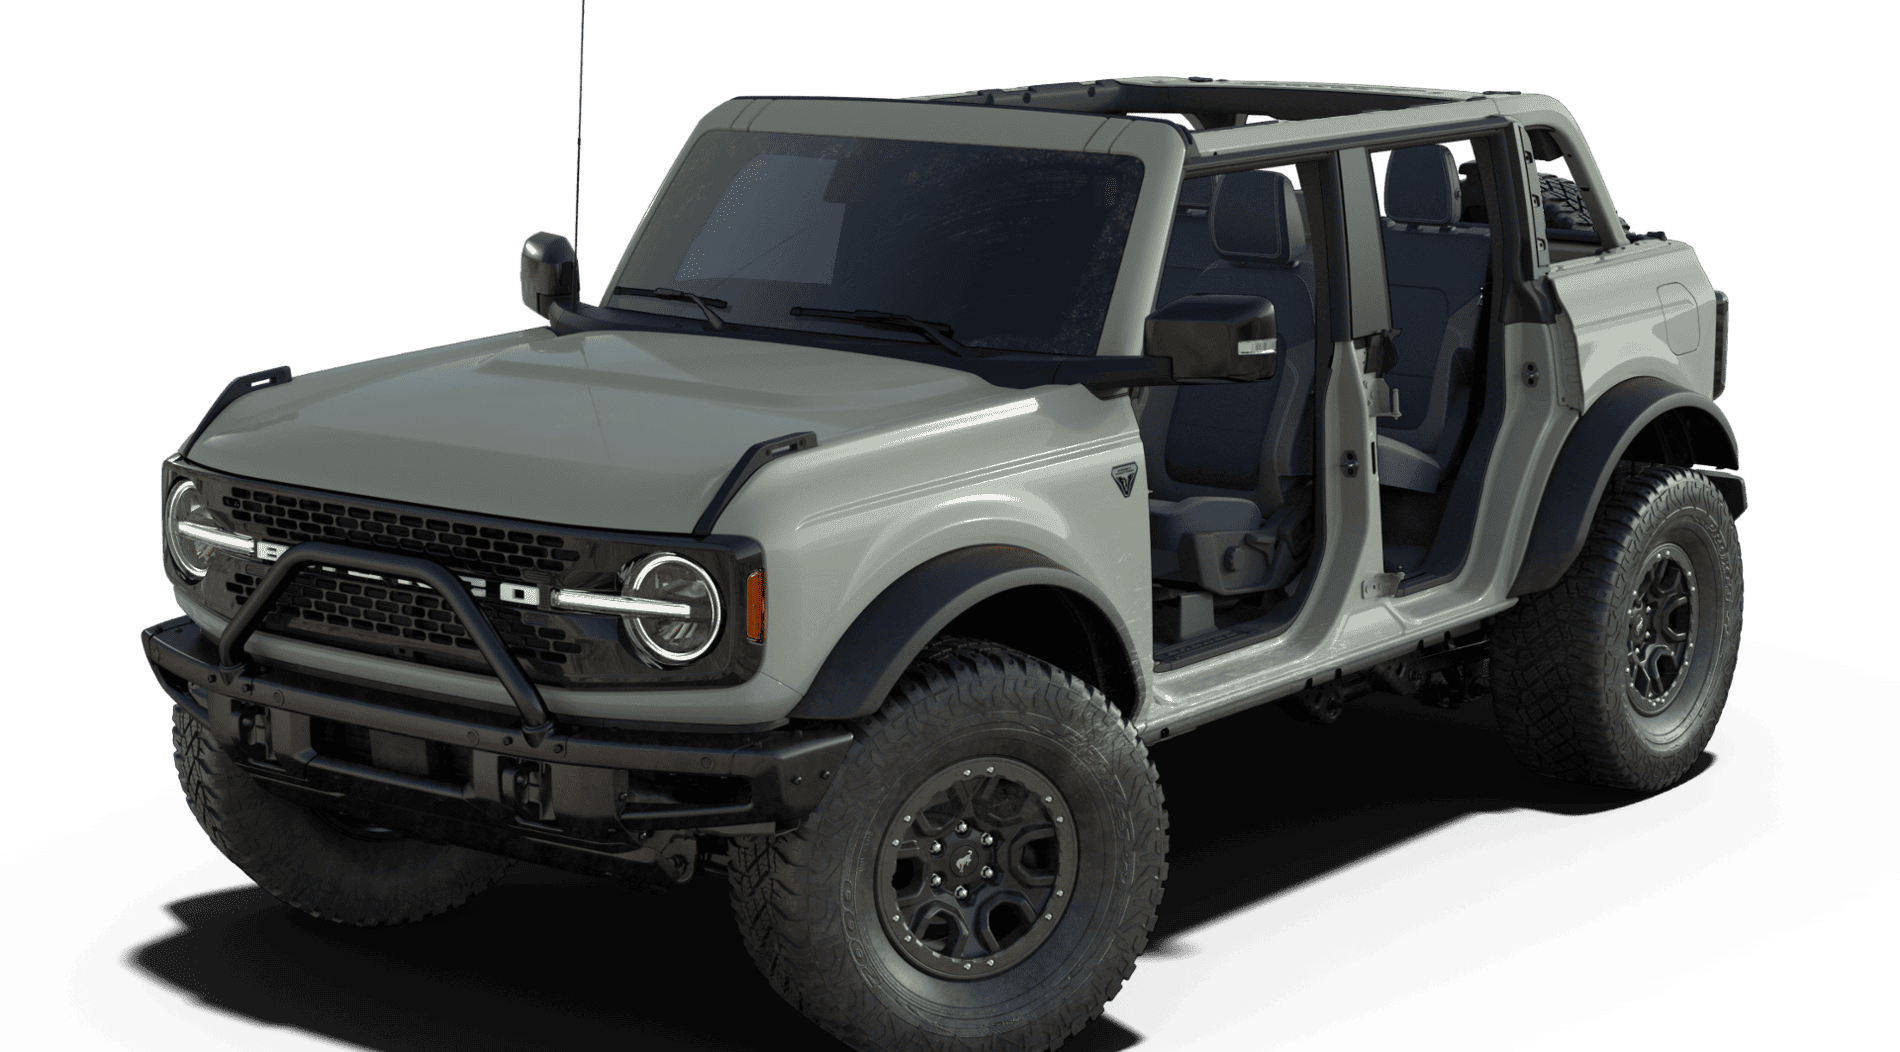 Ford Bronco Round 2 of hacked Bronco build & price configurator looks at all trims 2021 Bronco First Edition 4 Door